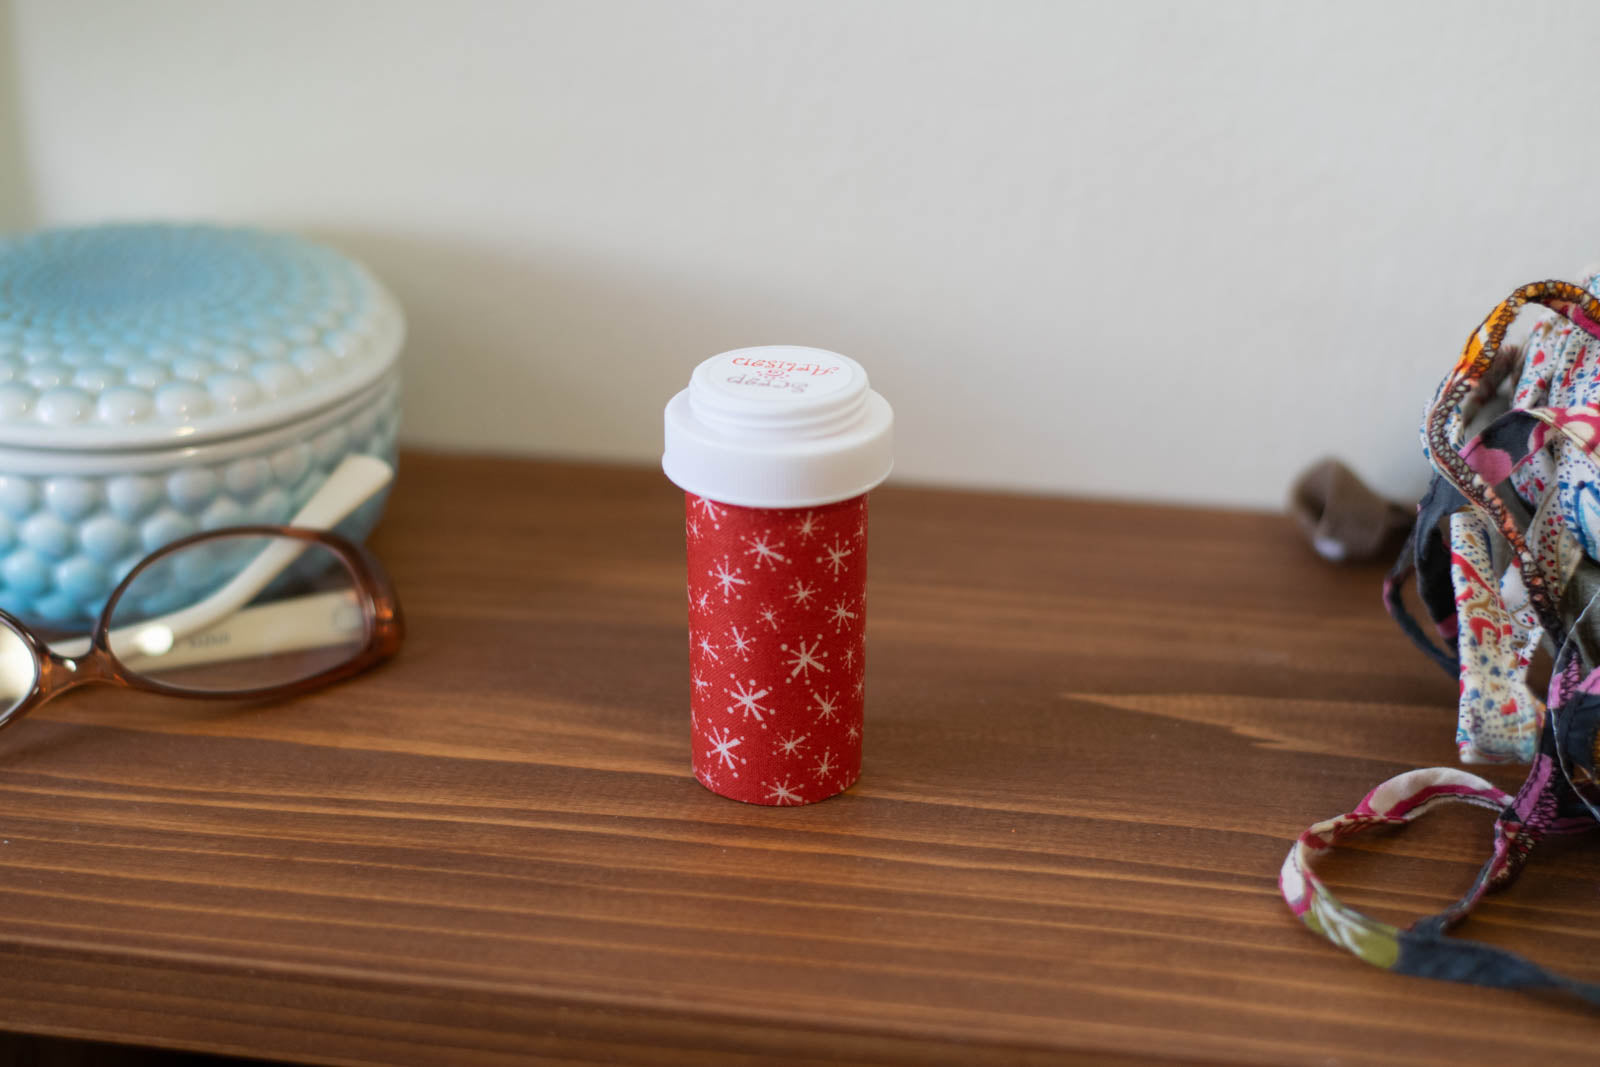 upcycled prescription bottle sewing kit — white sparkles on red, 3" high, closed